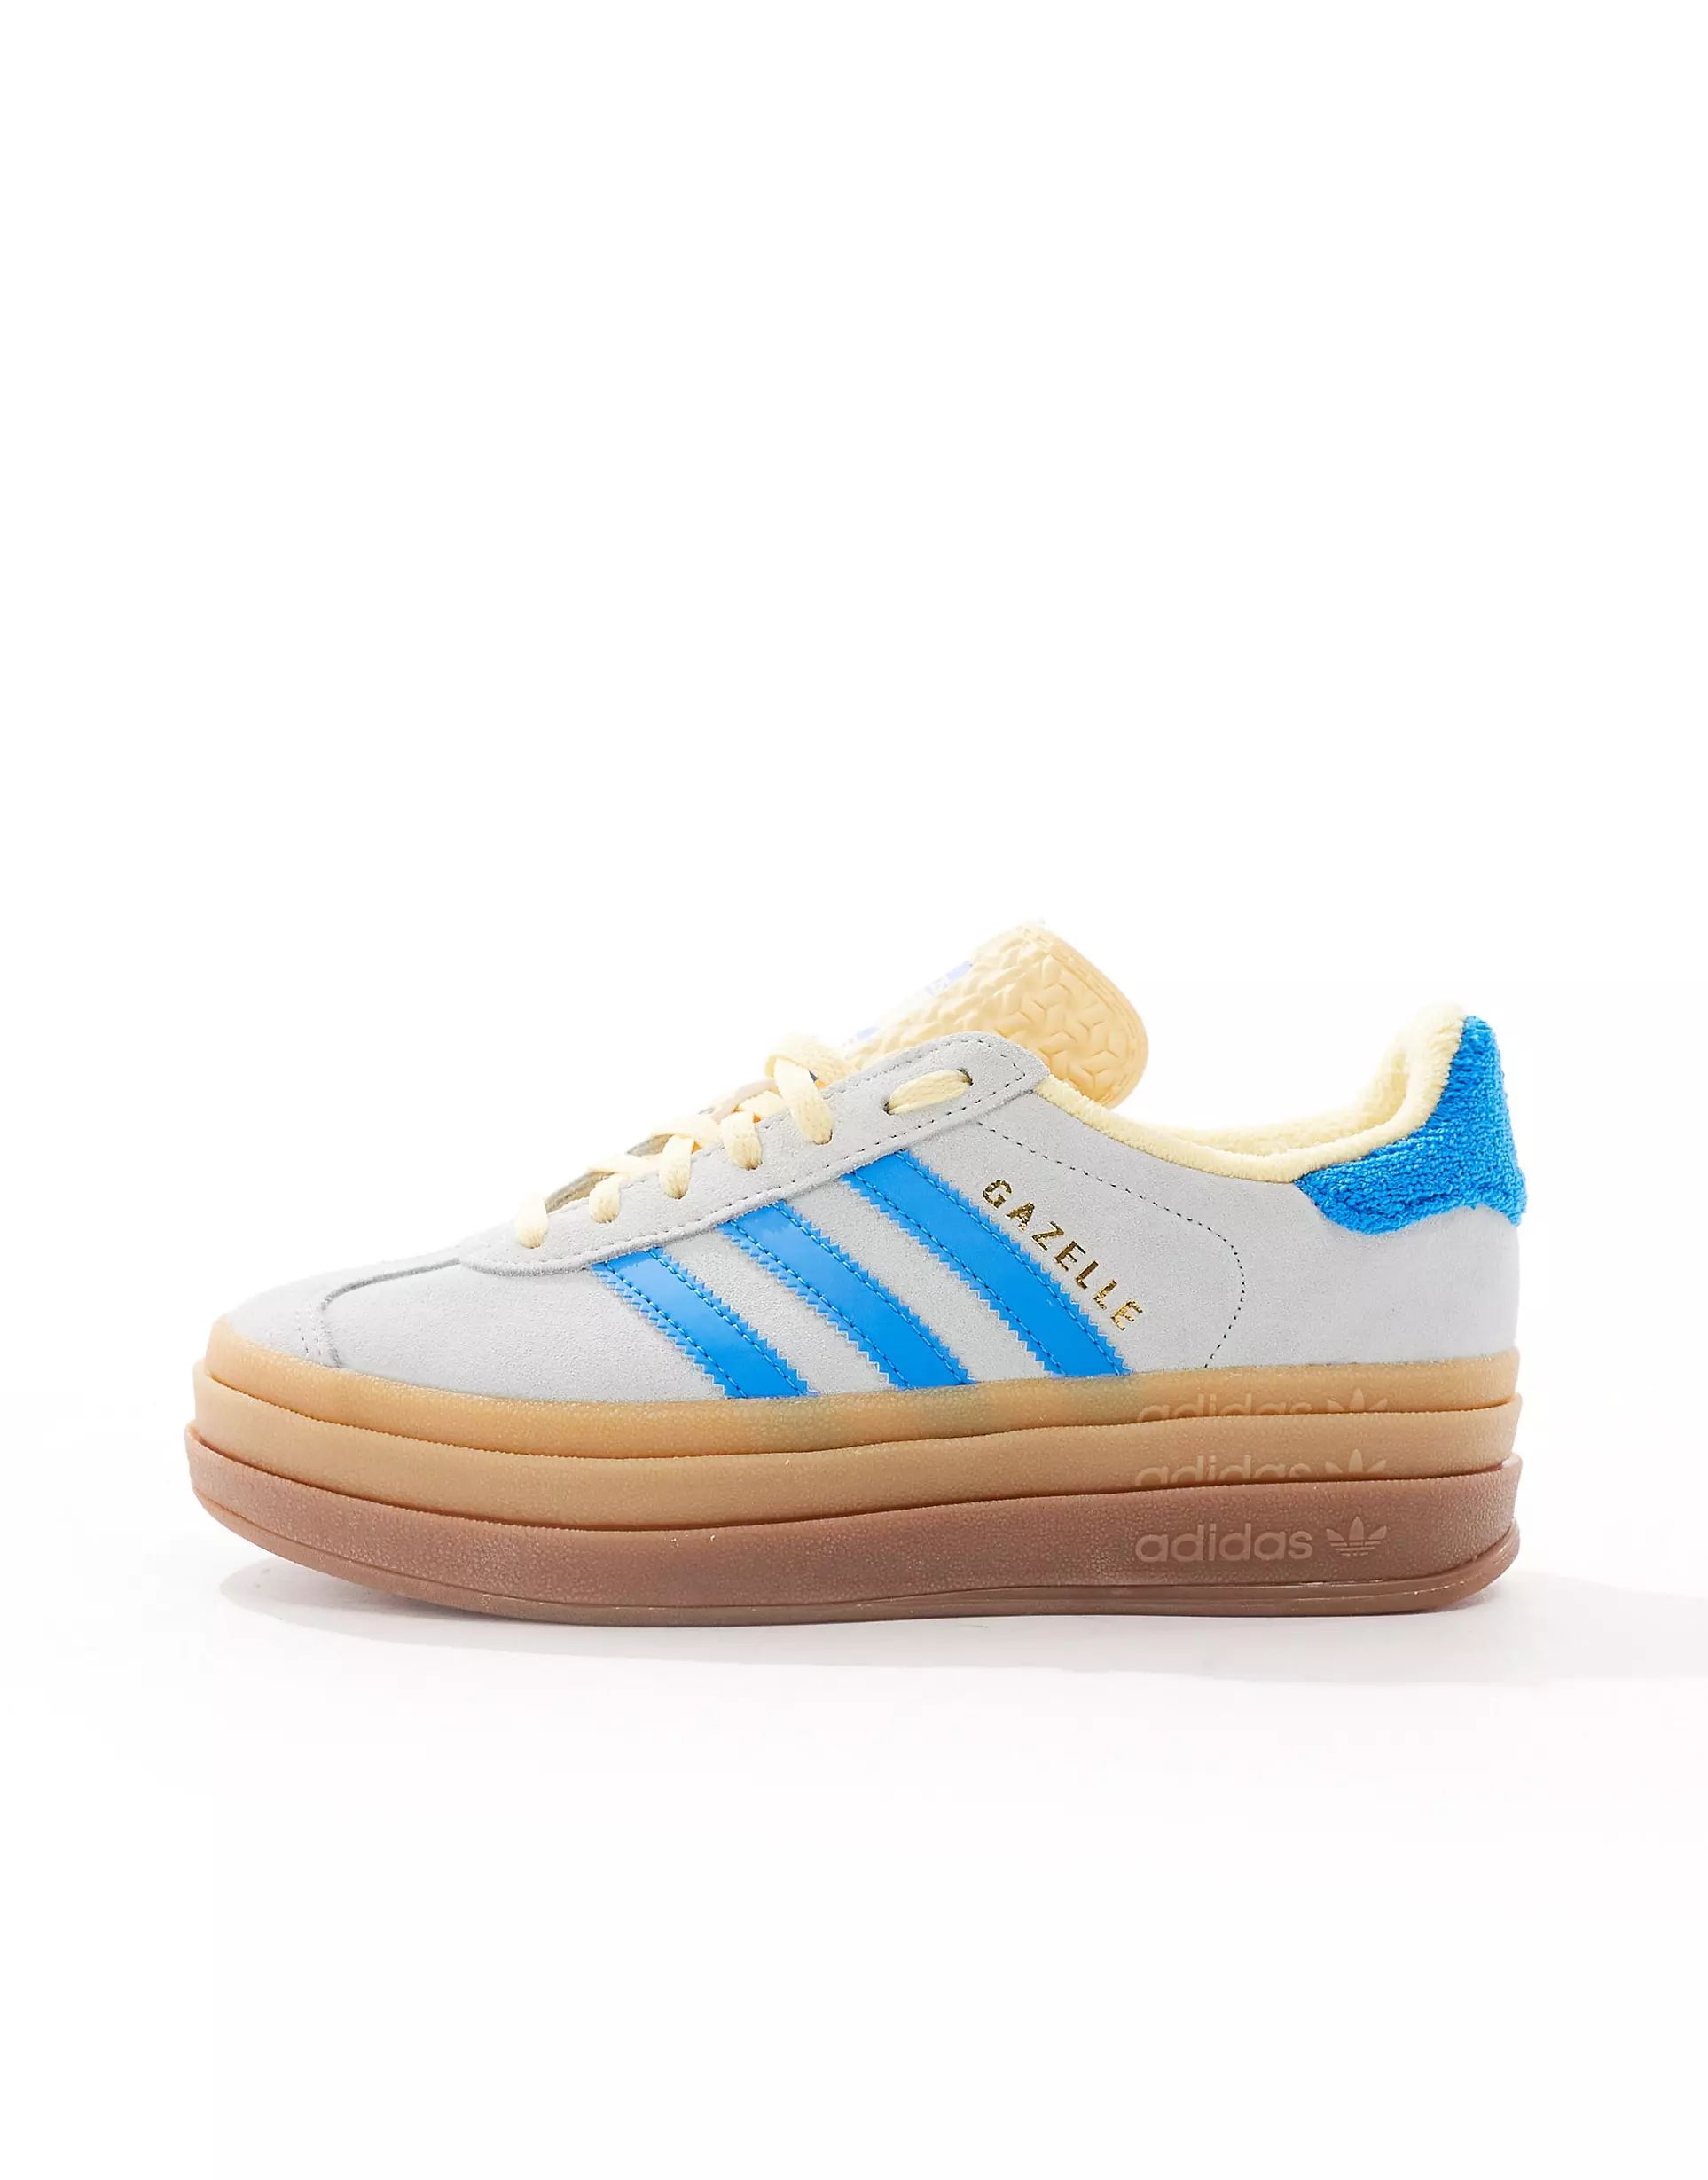 adidas Originals Gazelle Bold sneakers with rubber sole in blue and yellow | ASOS (Global)